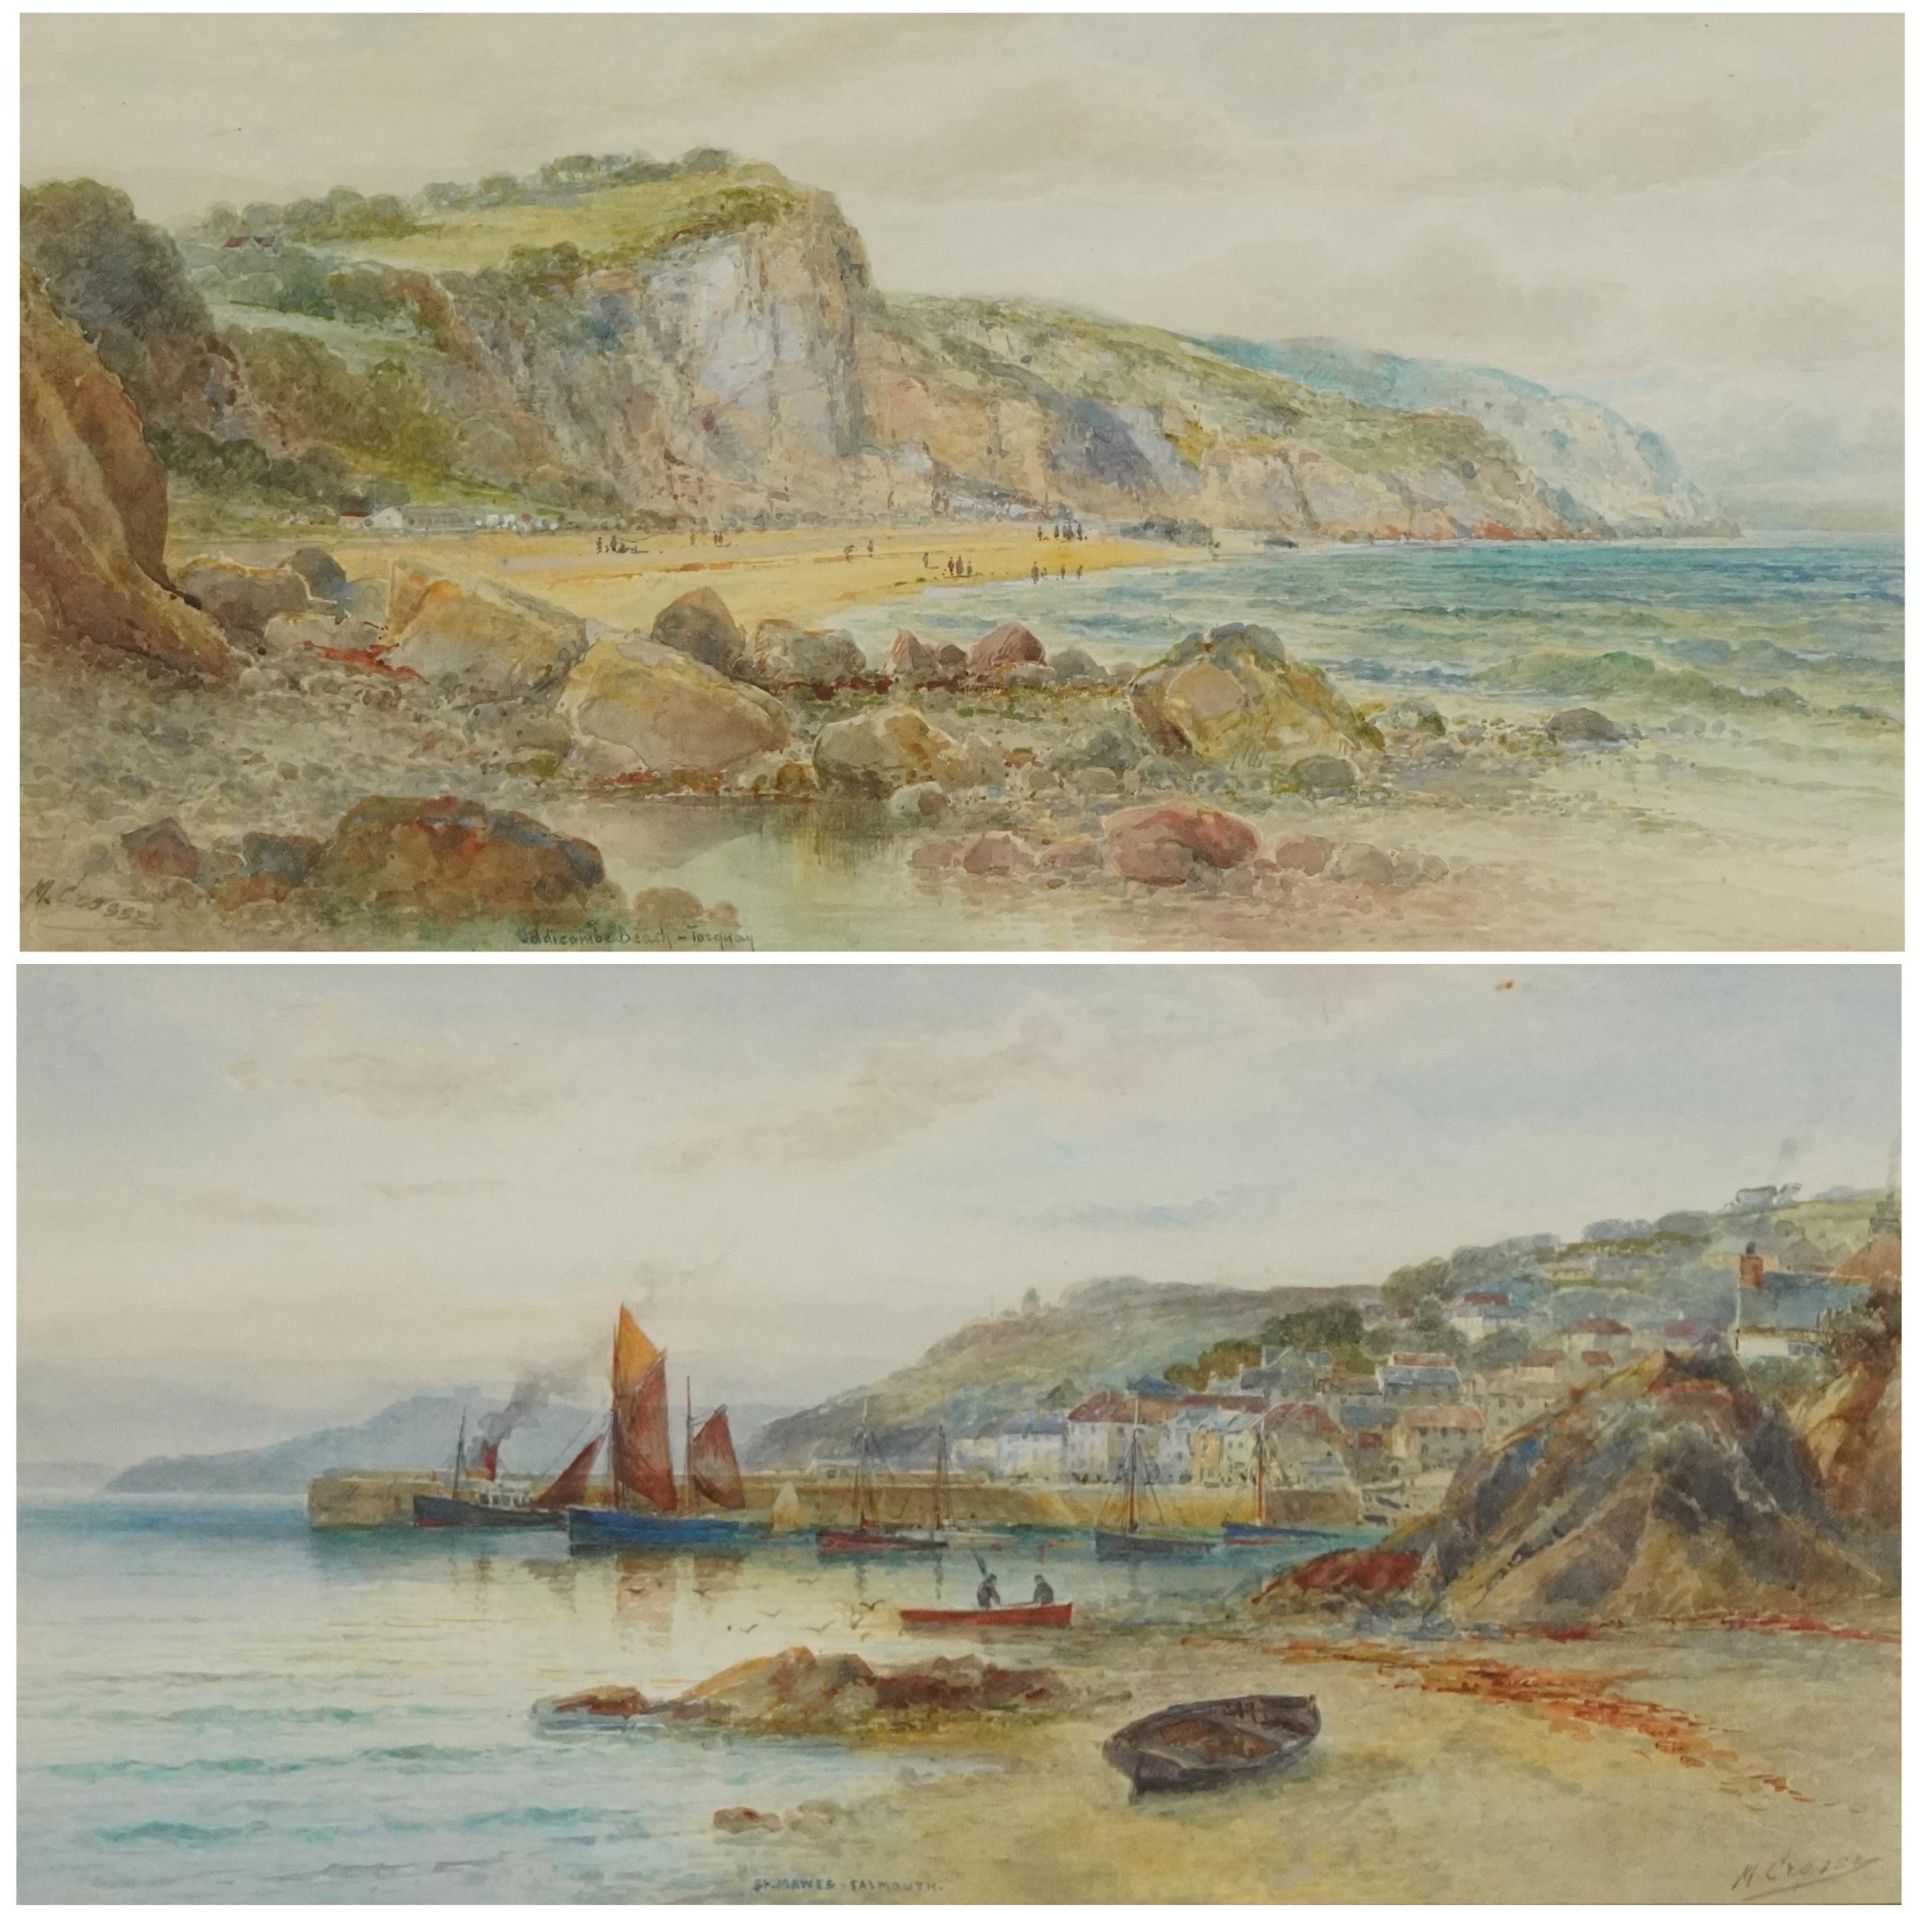 Malcolm Crosse - St Mawes Falmouth and Oddicombe Beach Torquay, pair of early 20th century